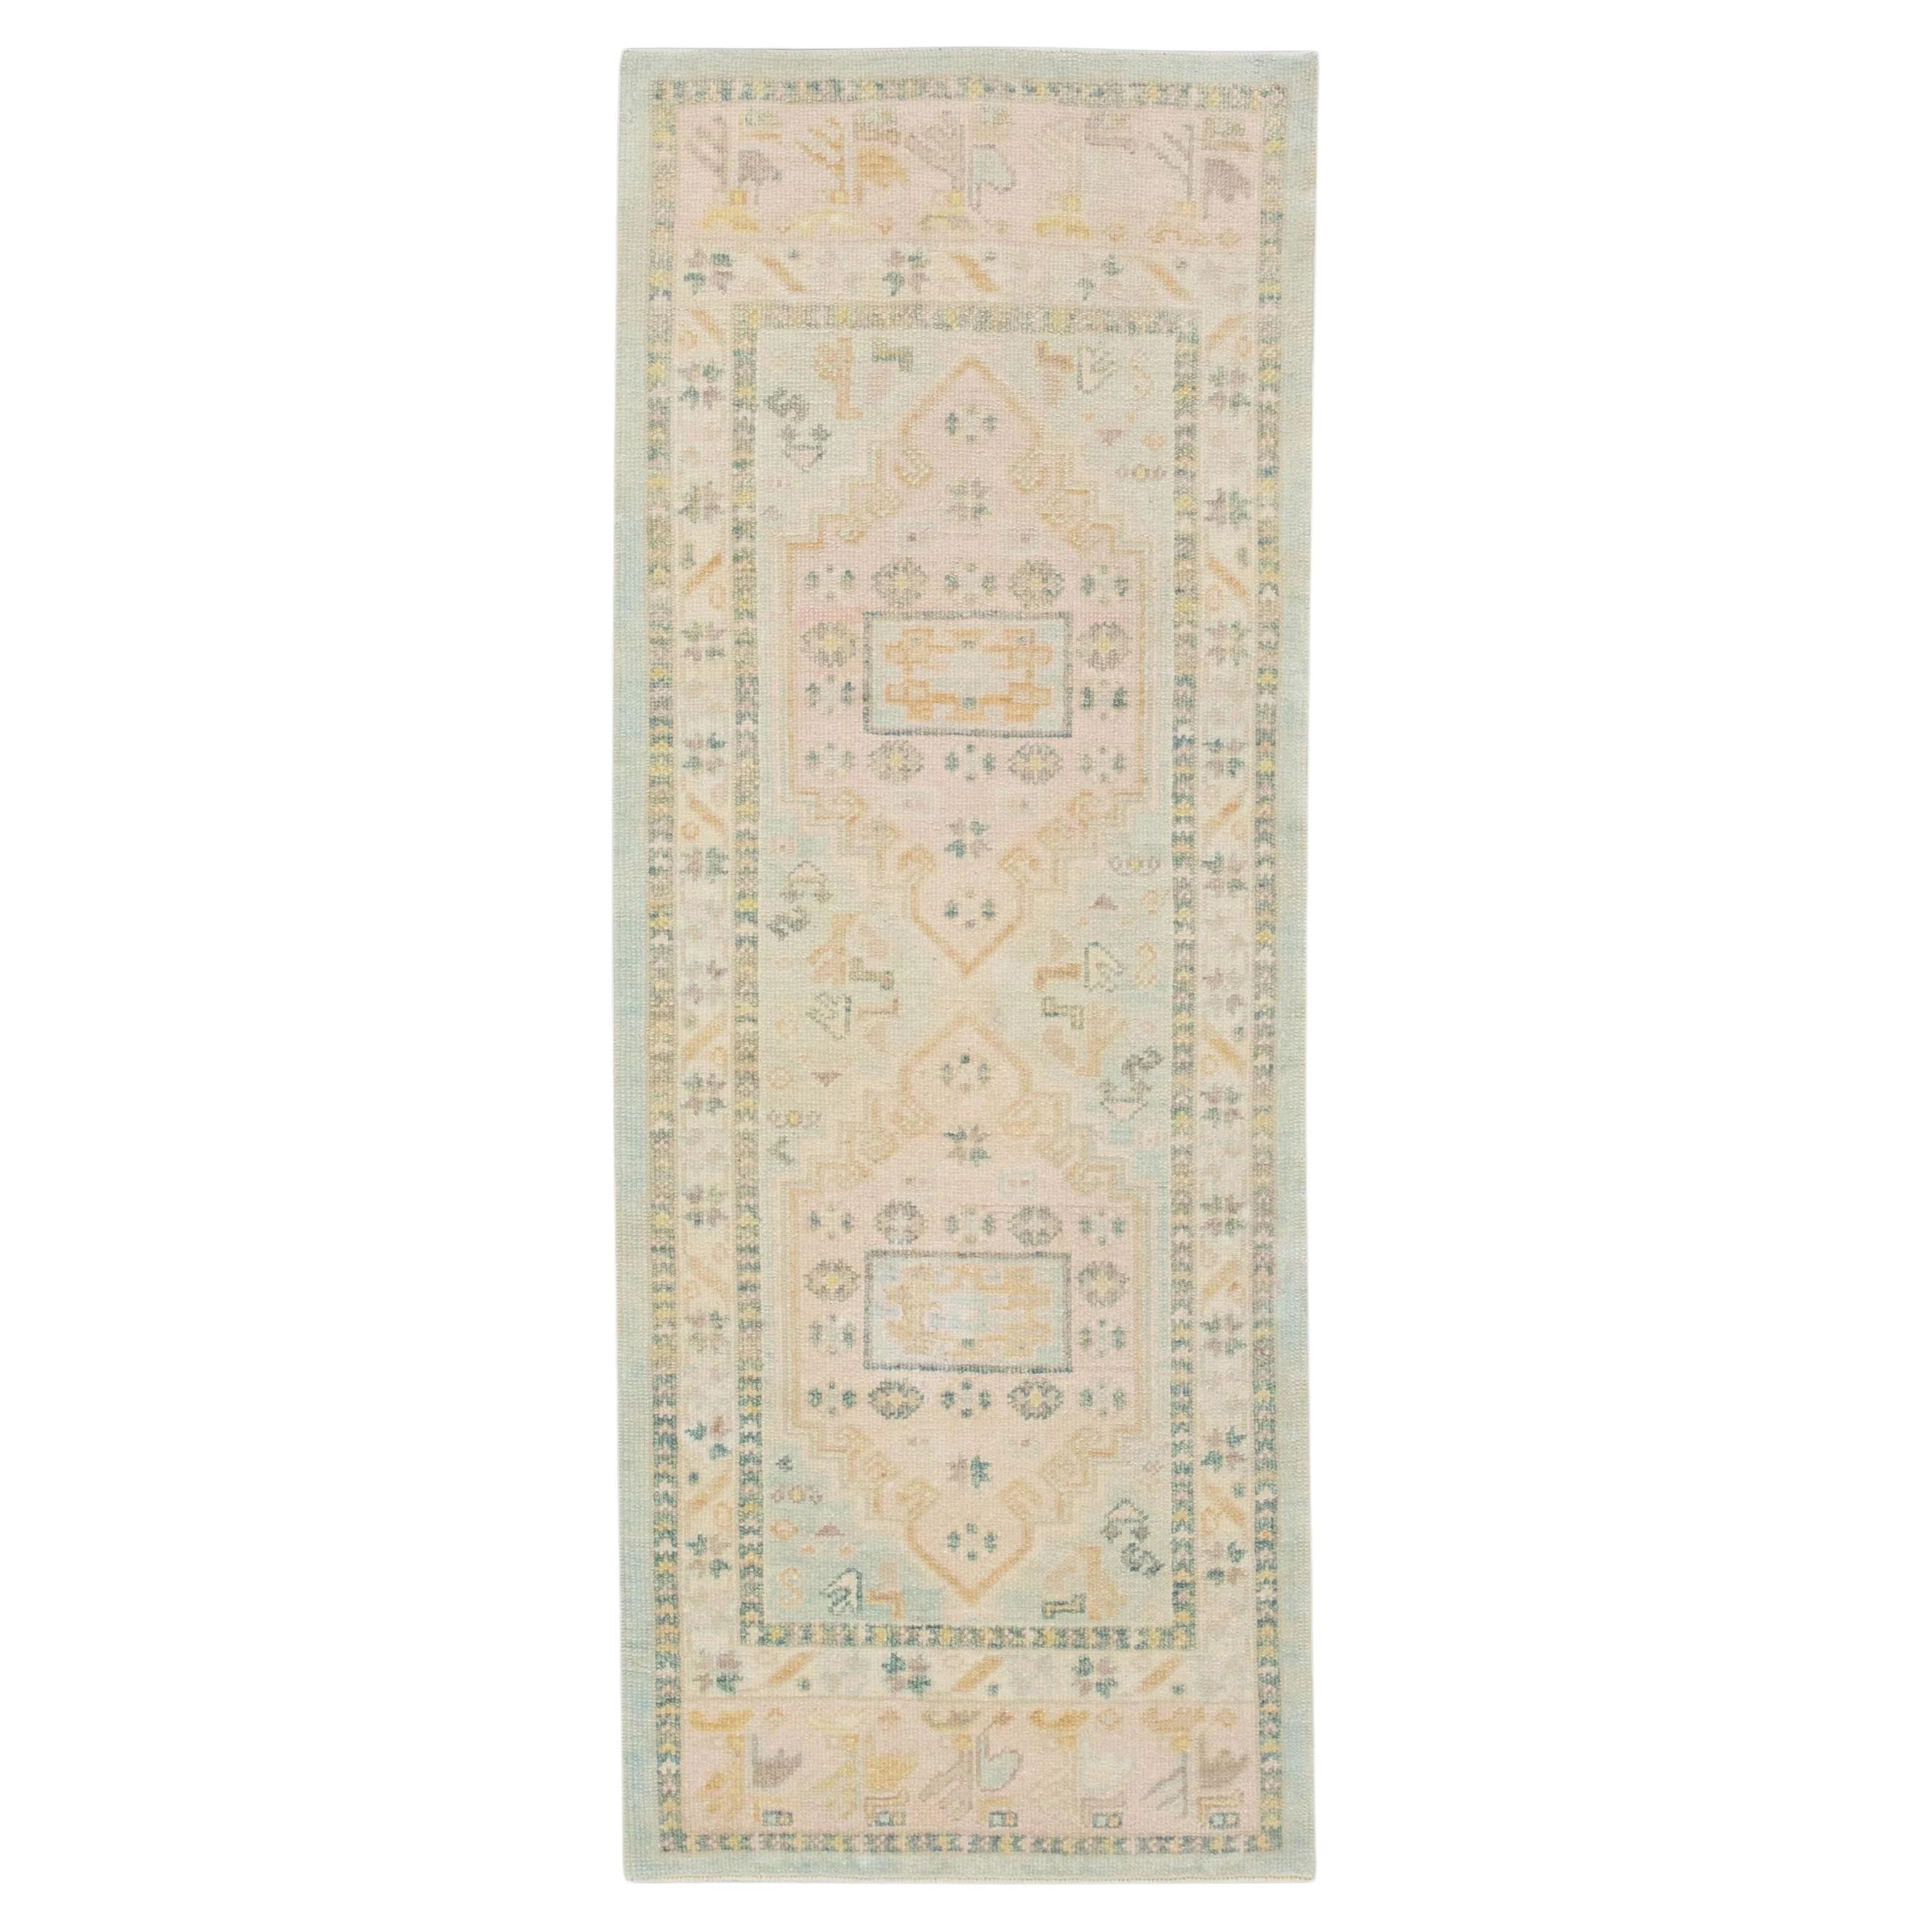 Handwoven Wool Turkish Oushak Rug with Multicolor Medallion Design 2'11" x 7'3"